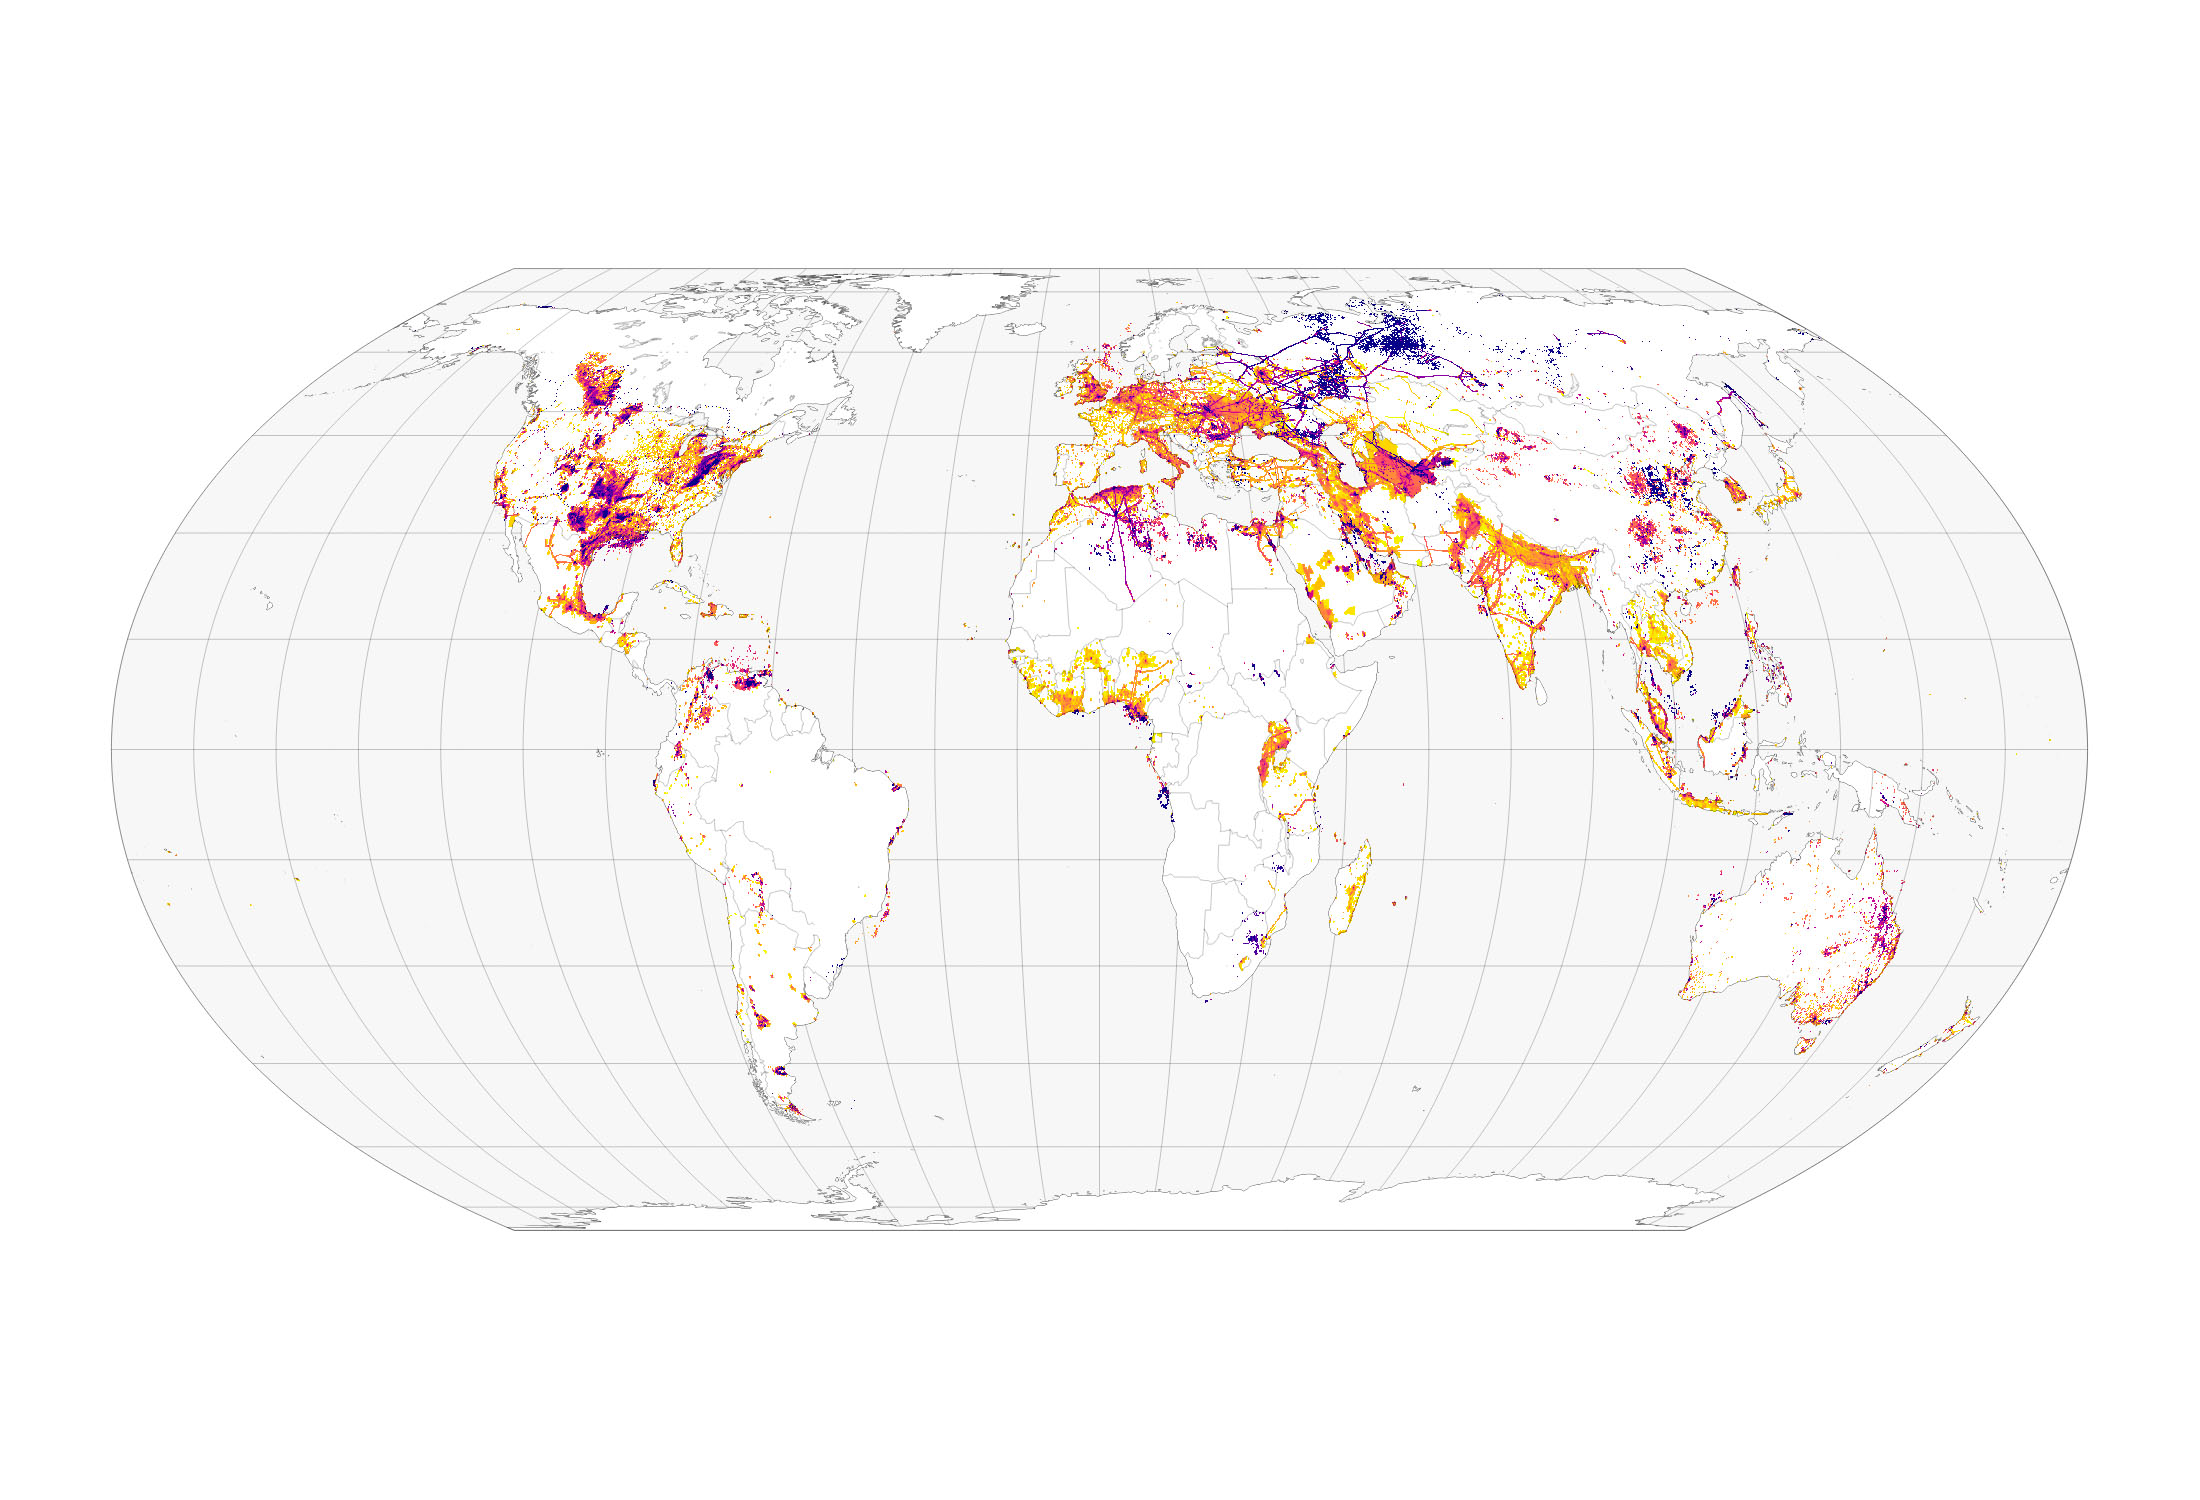 Mapping Methane Emissions from Fossil Fuel Exploitation - related image preview